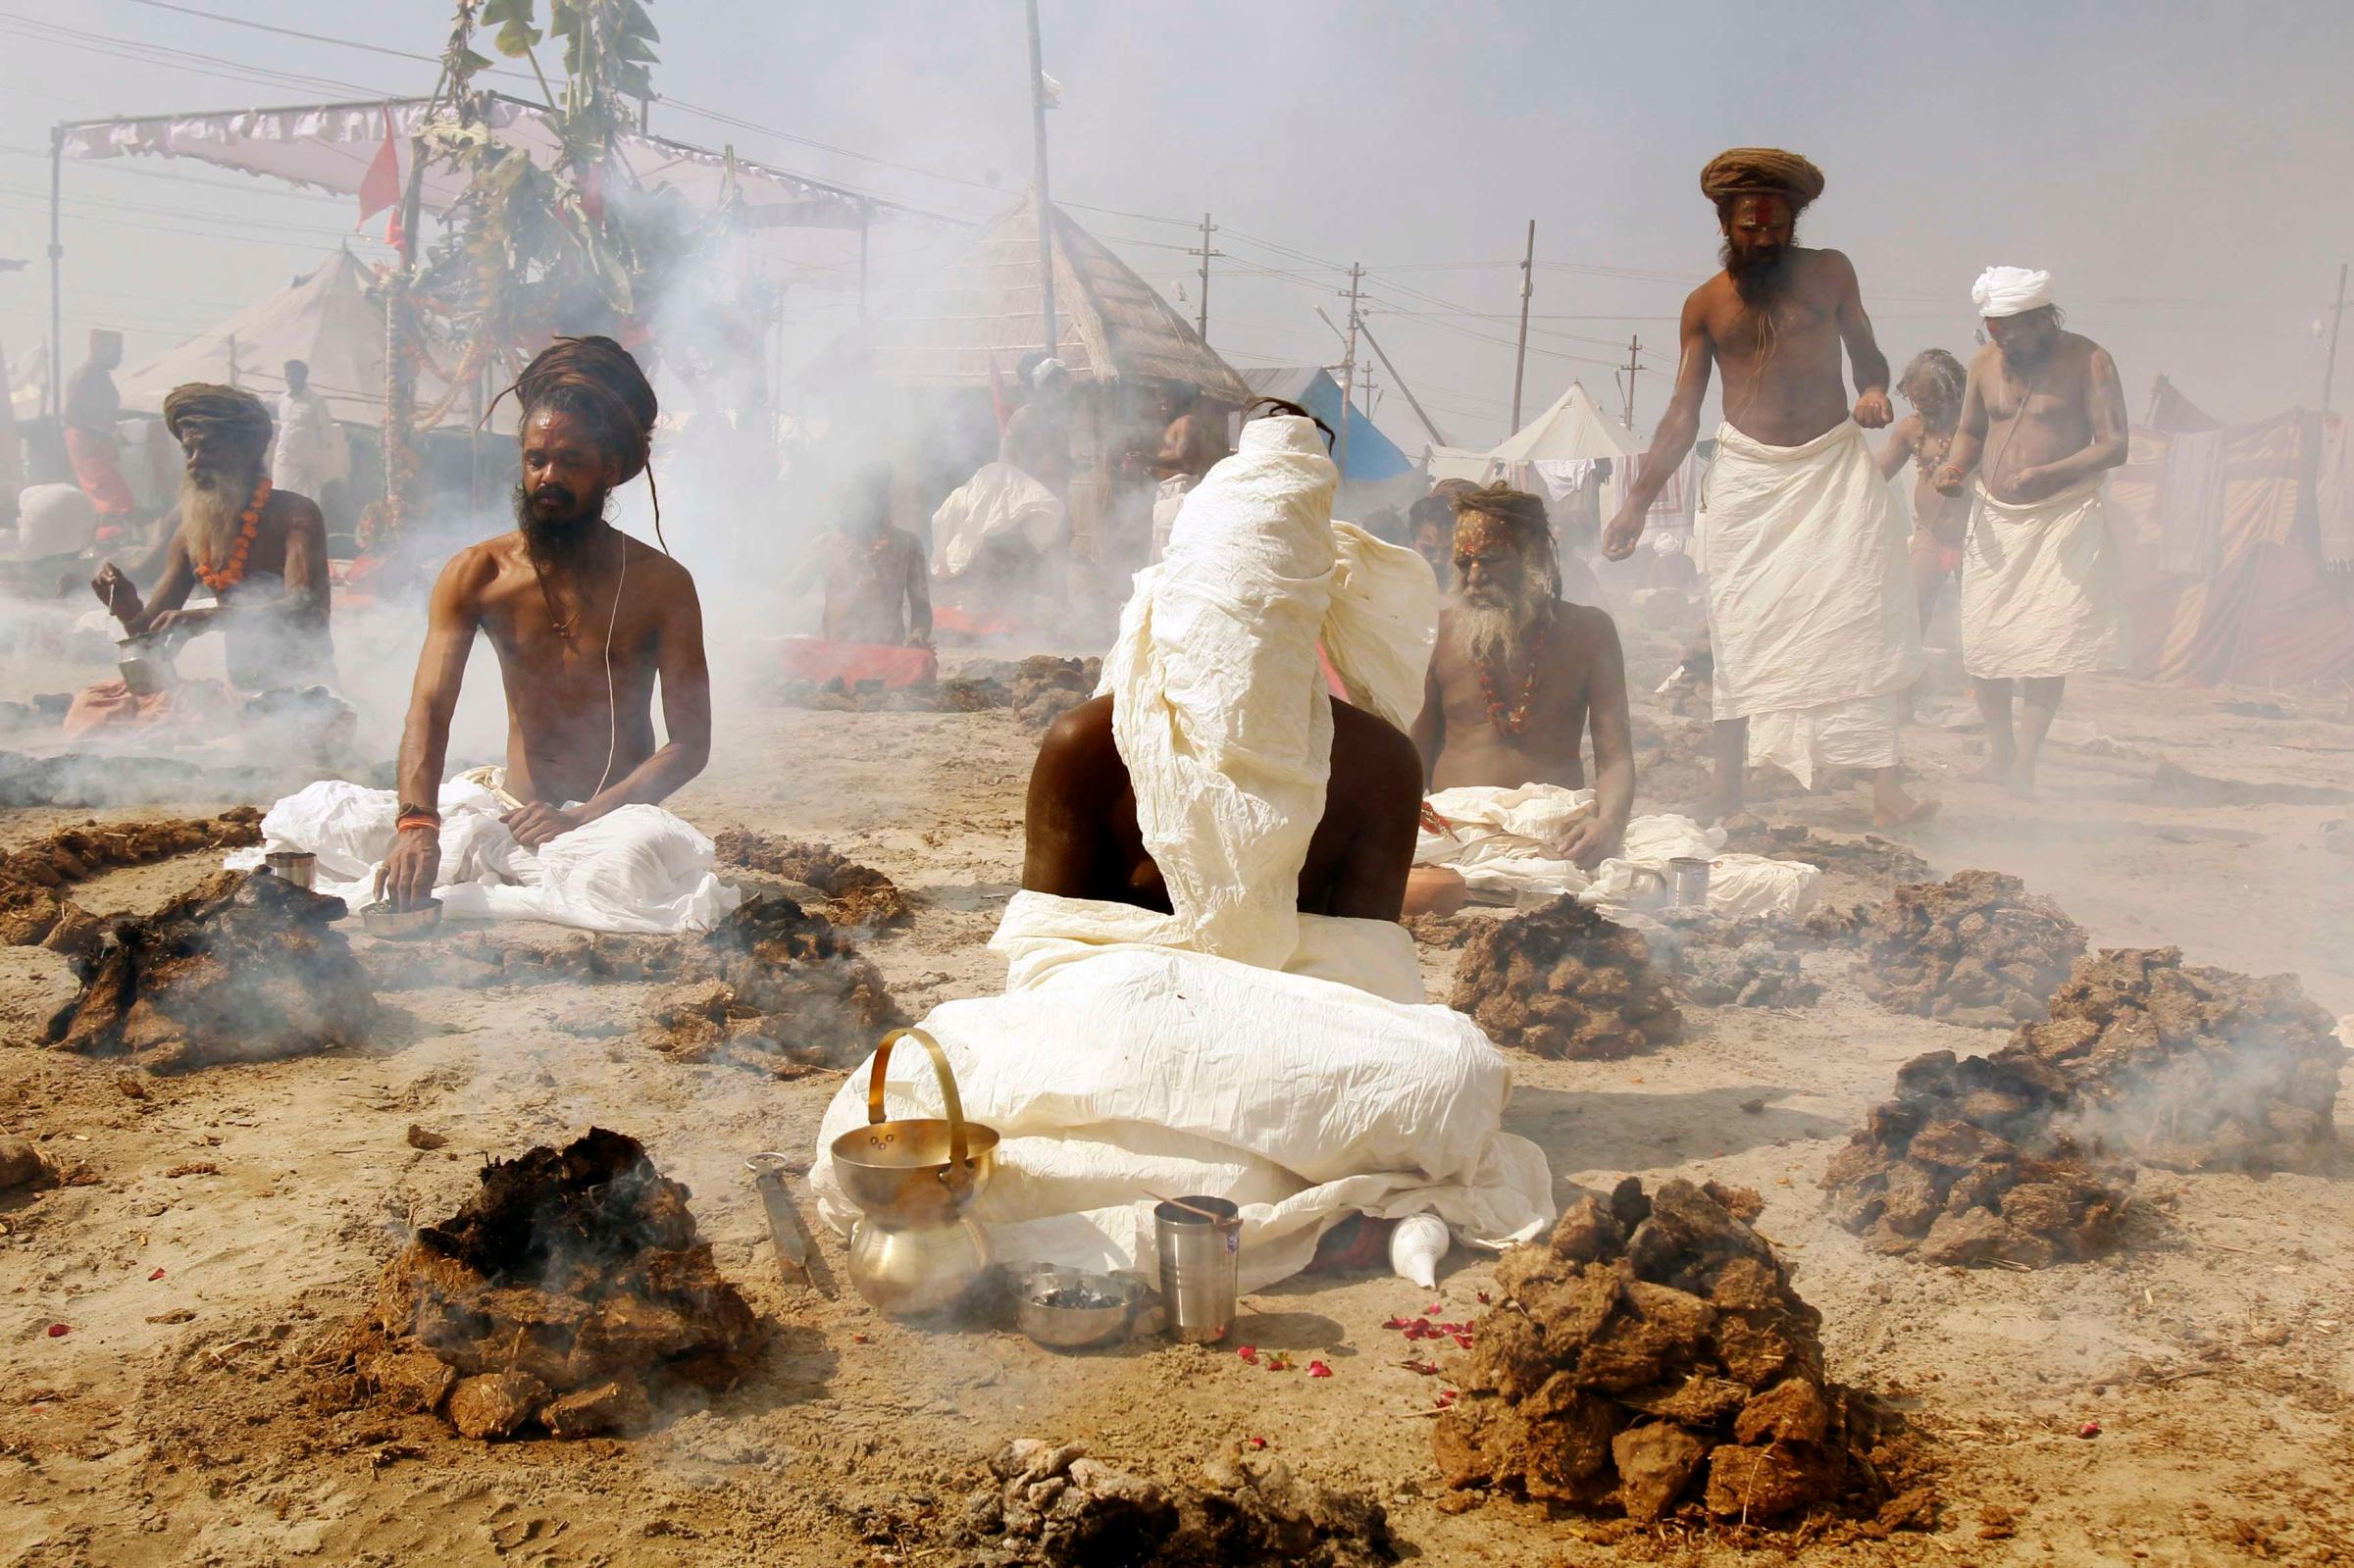 Sadhus, or Hindu holy men, perform prayers while sitting inside circles of burning "Upale" (or dried cow dung cakes) on the banks of the river Ganges during the Magh Mela festival in the northern Indian city of Allahabad Feb. 4, 2014.